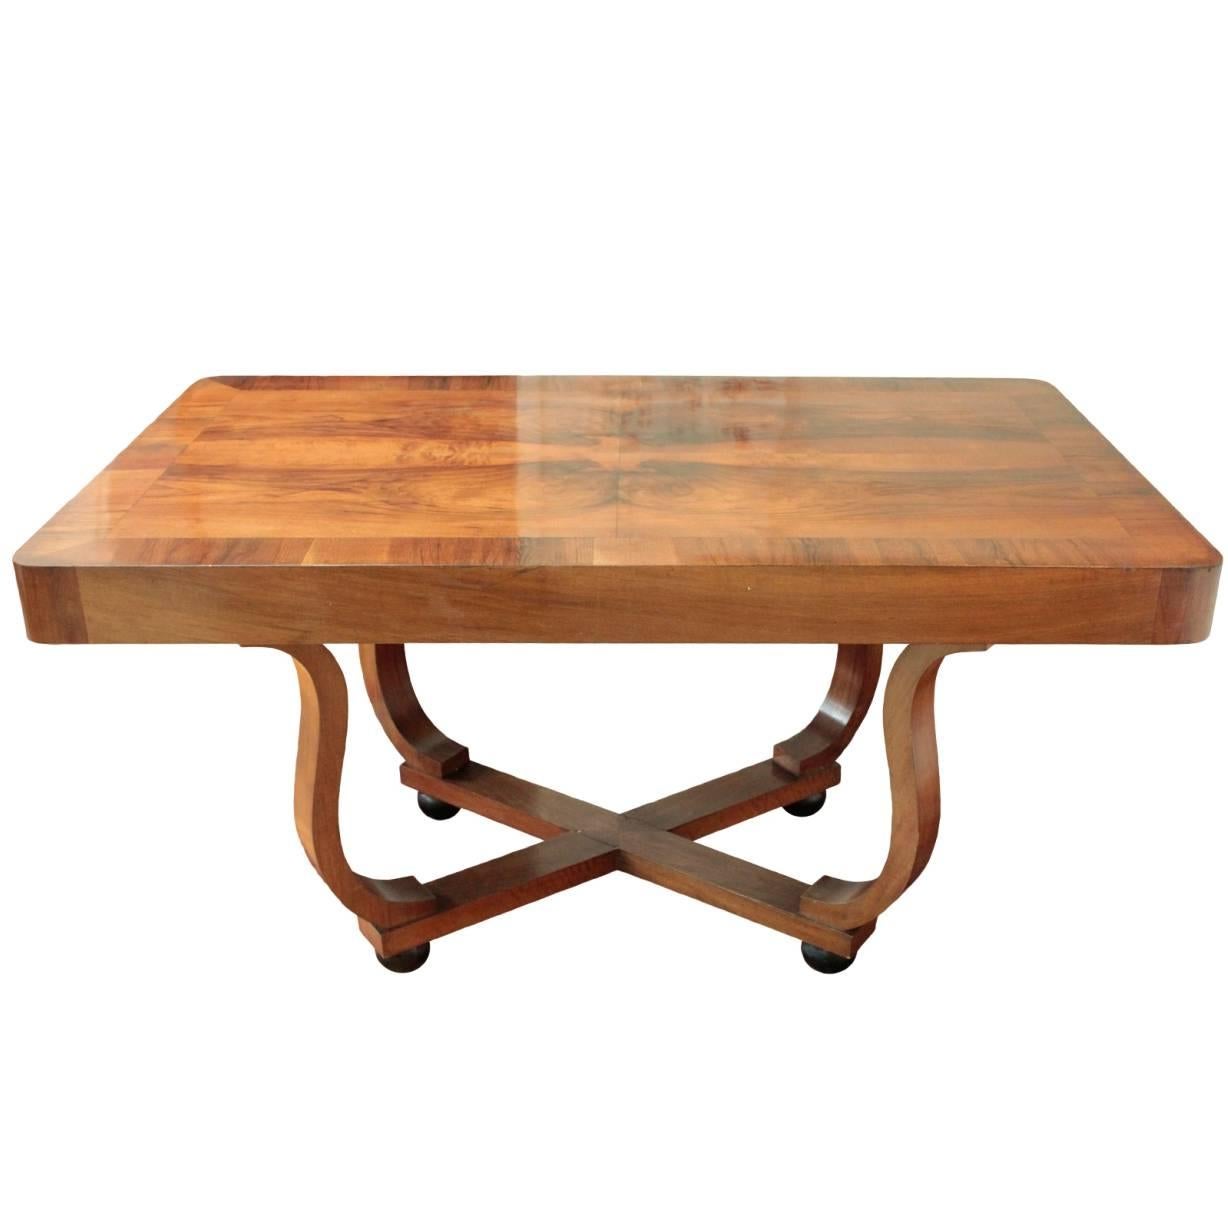 French Art Deco Period Rectangular Dining Table For Sale